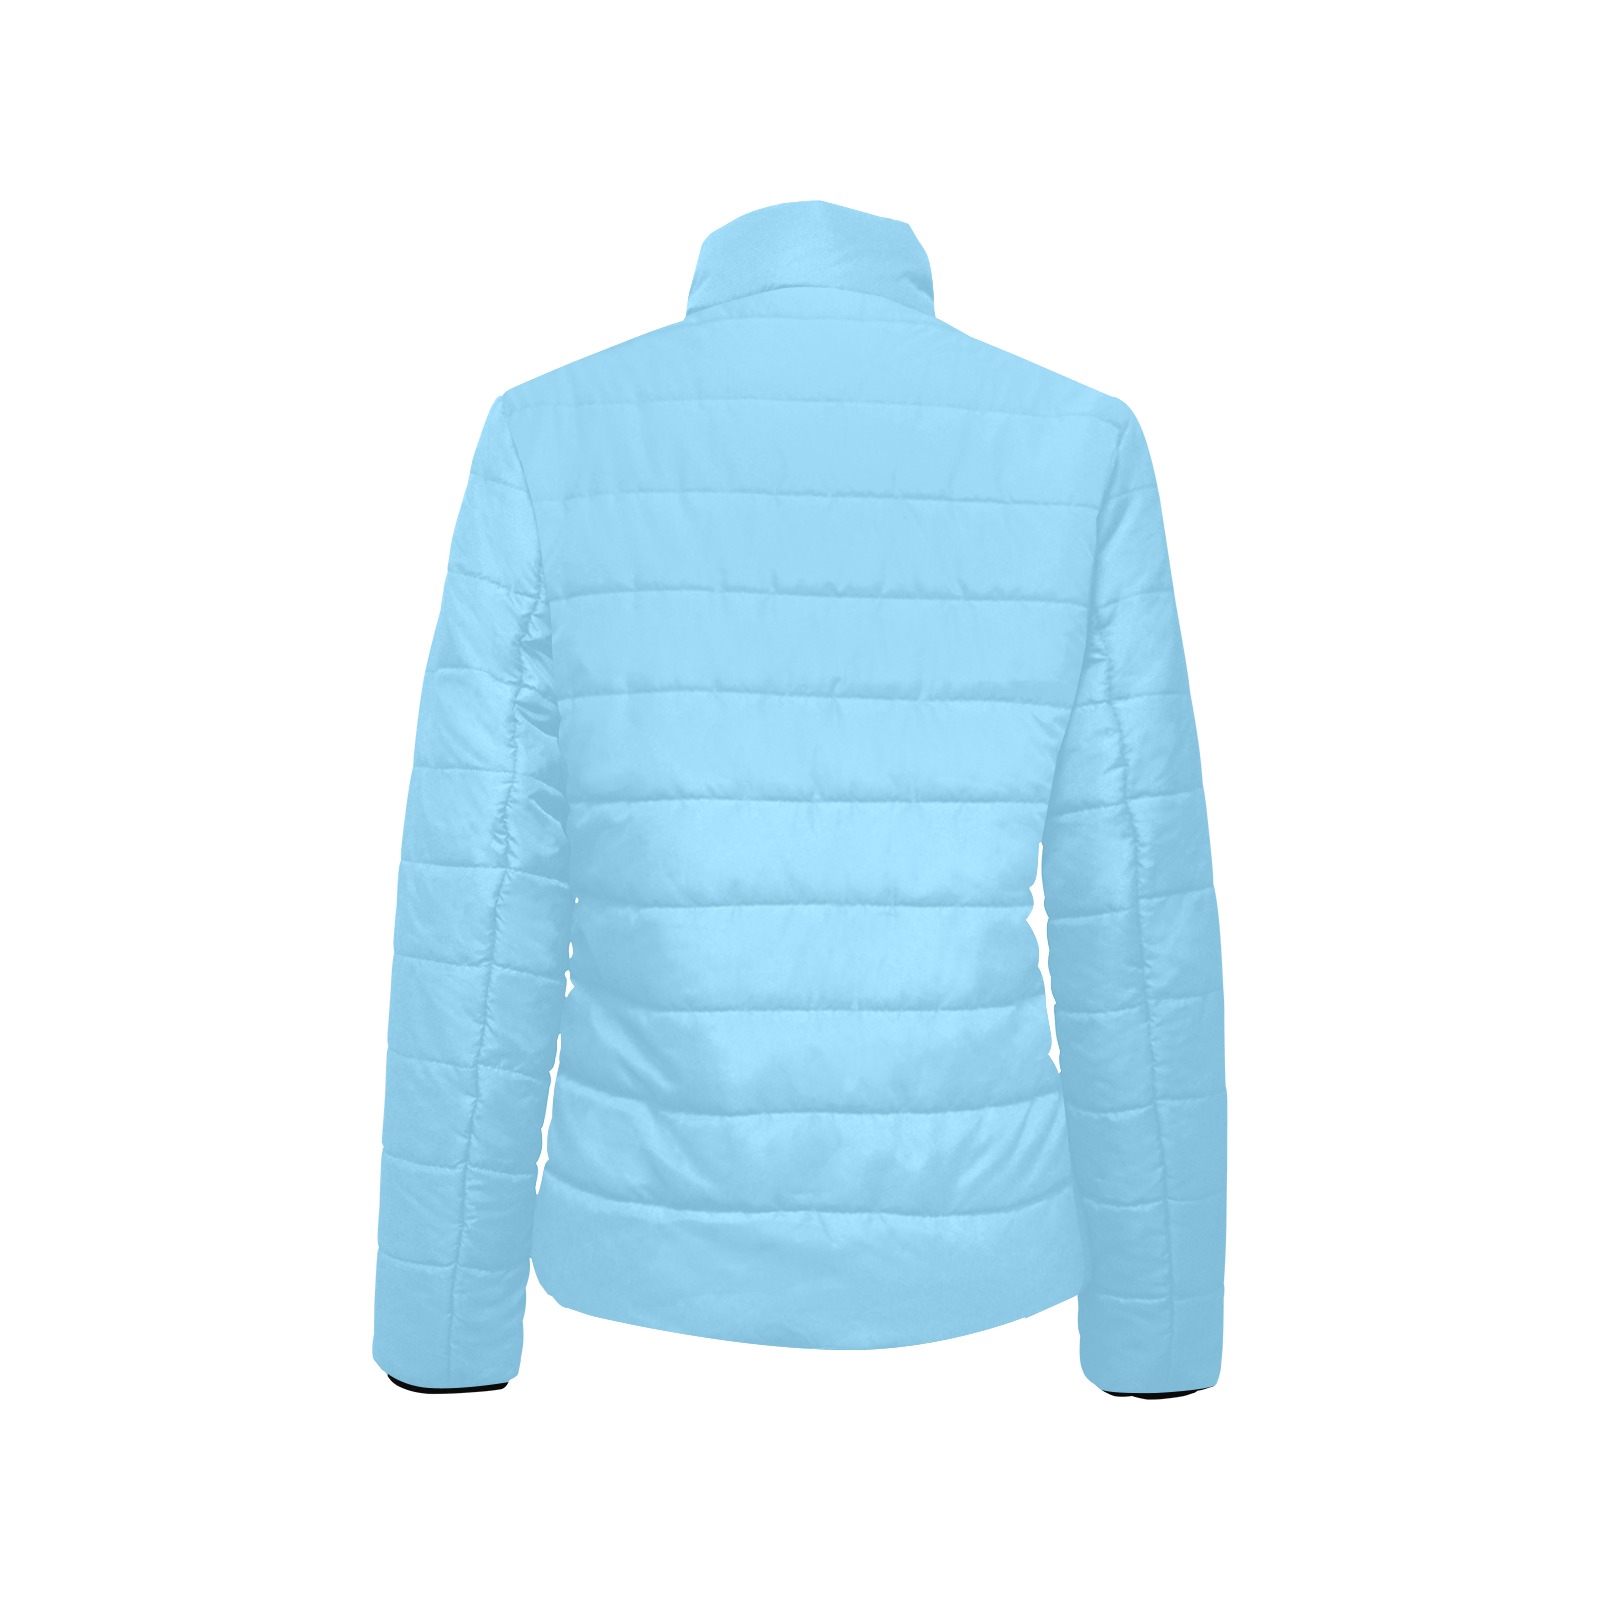 color baby blue Women's Stand Collar Padded Jacket (Model H41)